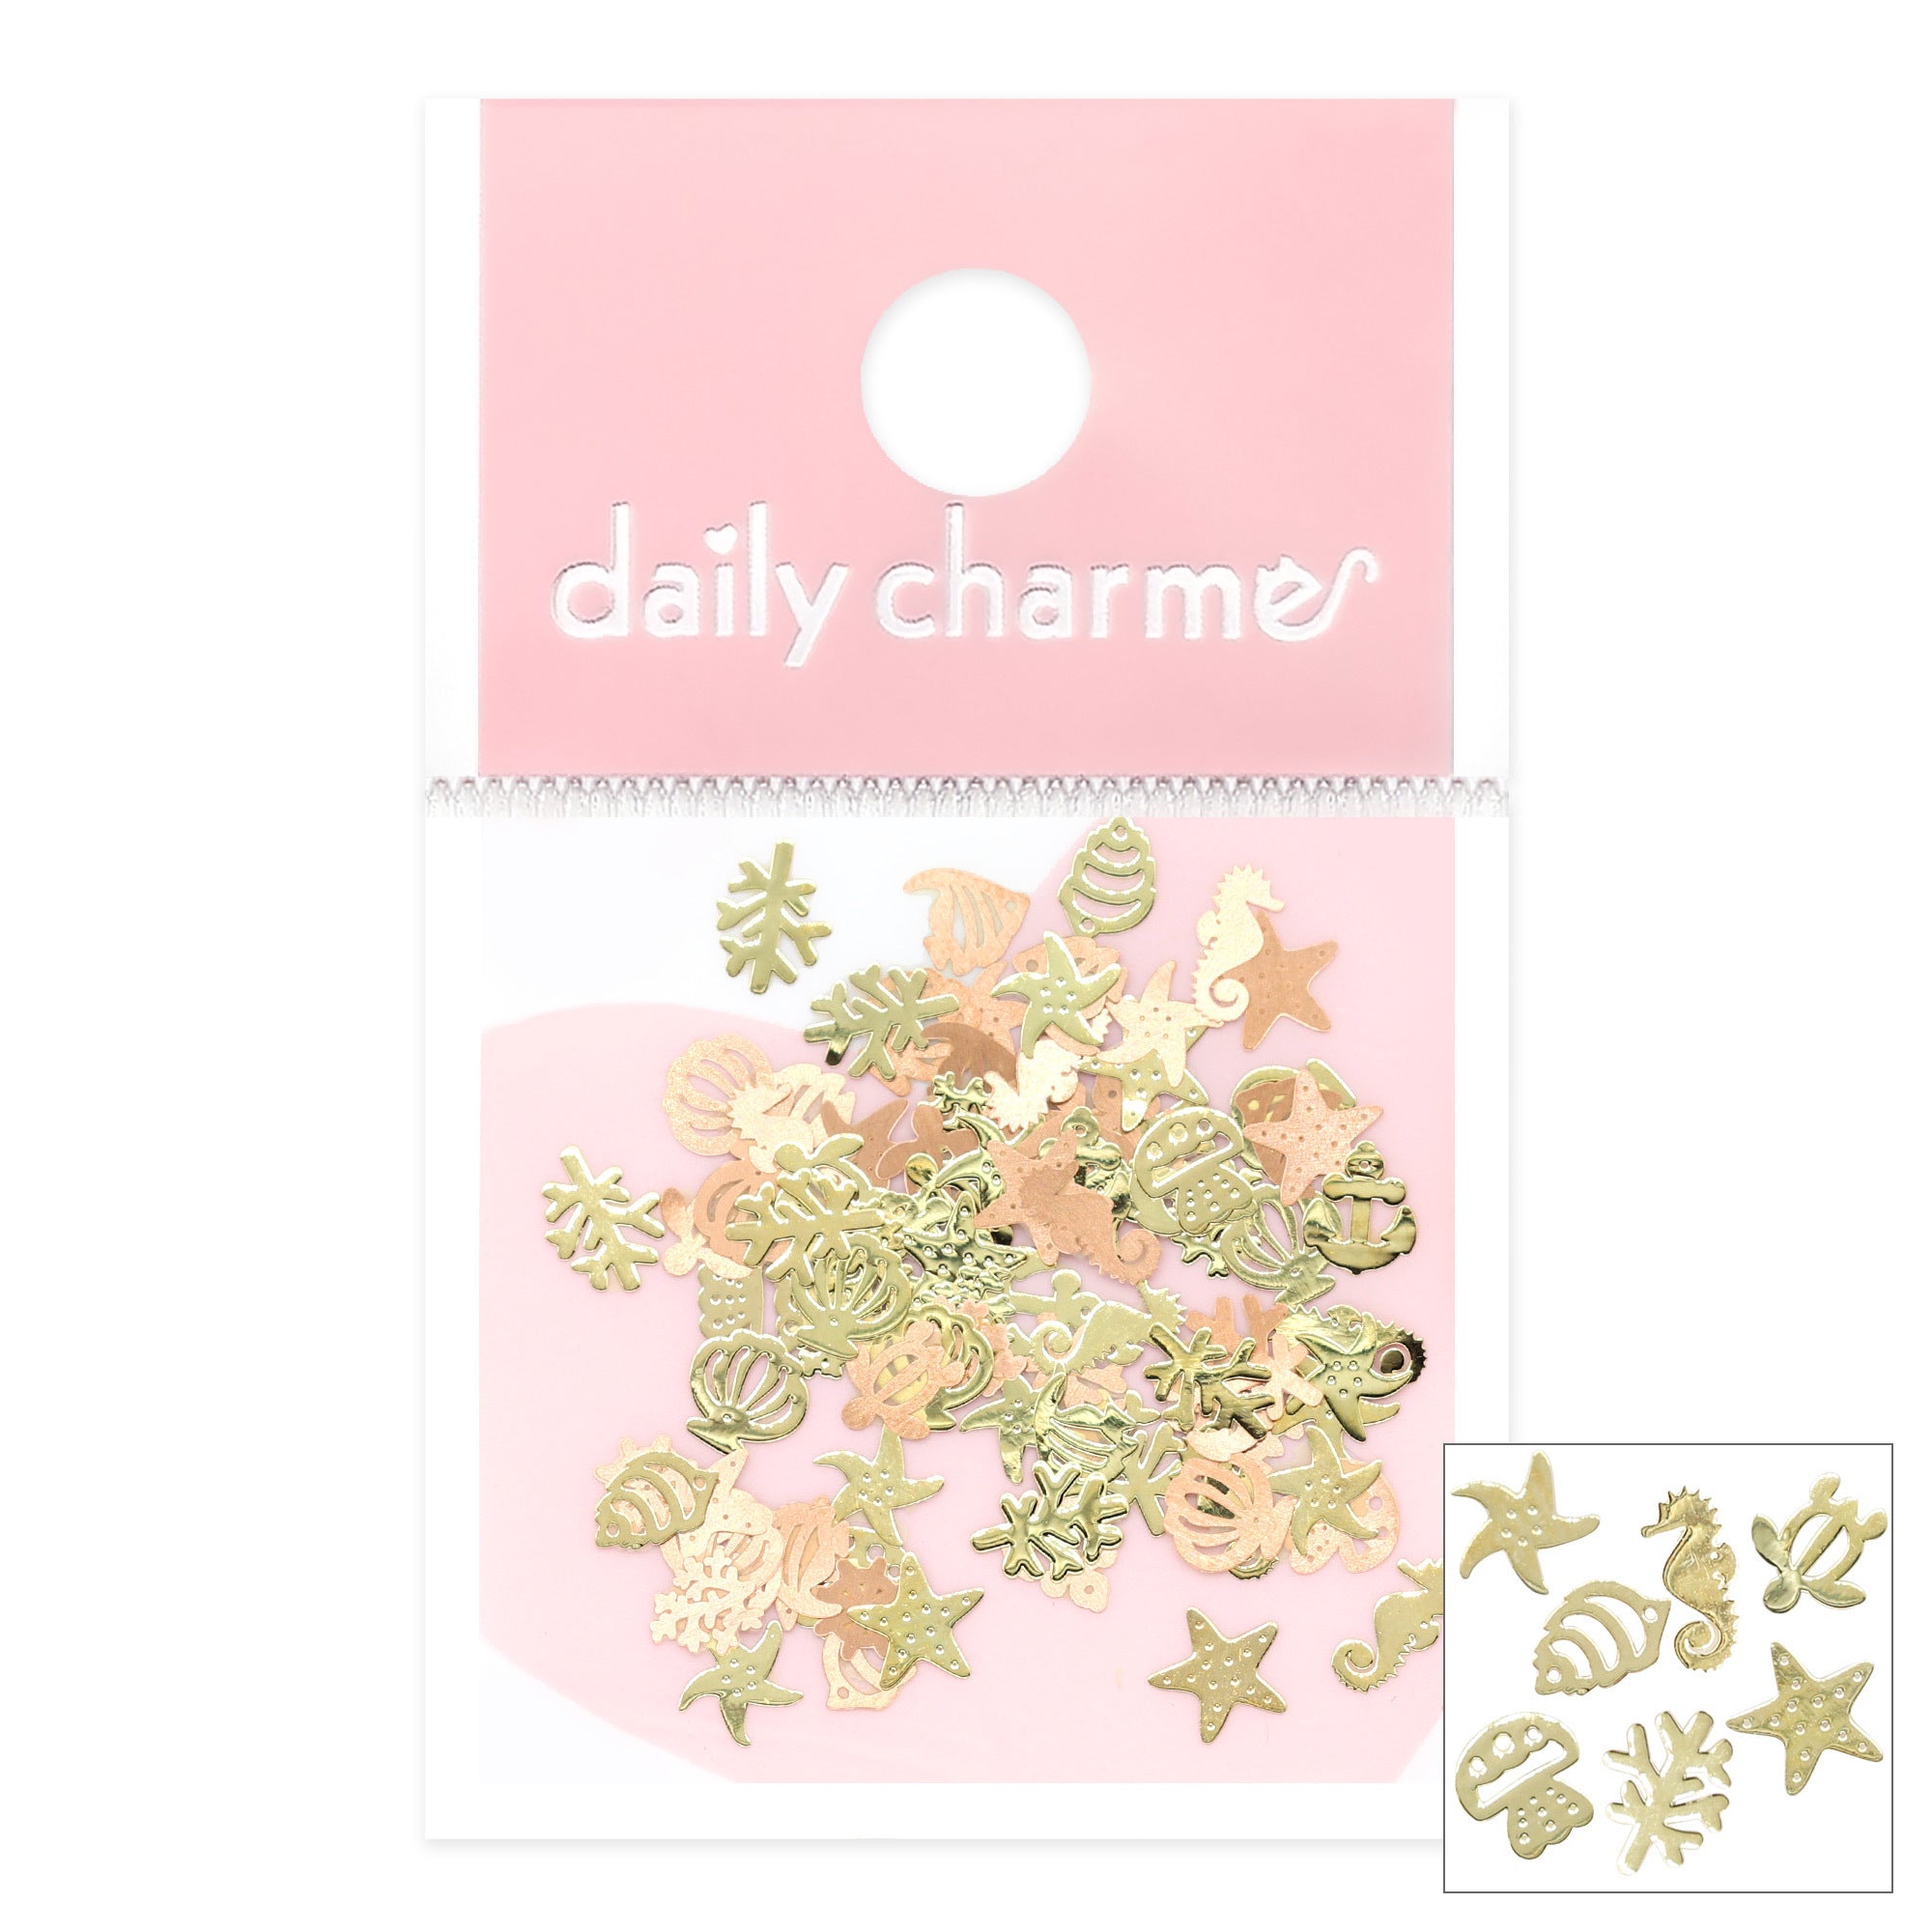 Daily Charme Nail Art | Under the Sea Gold Metallic Stud Mix